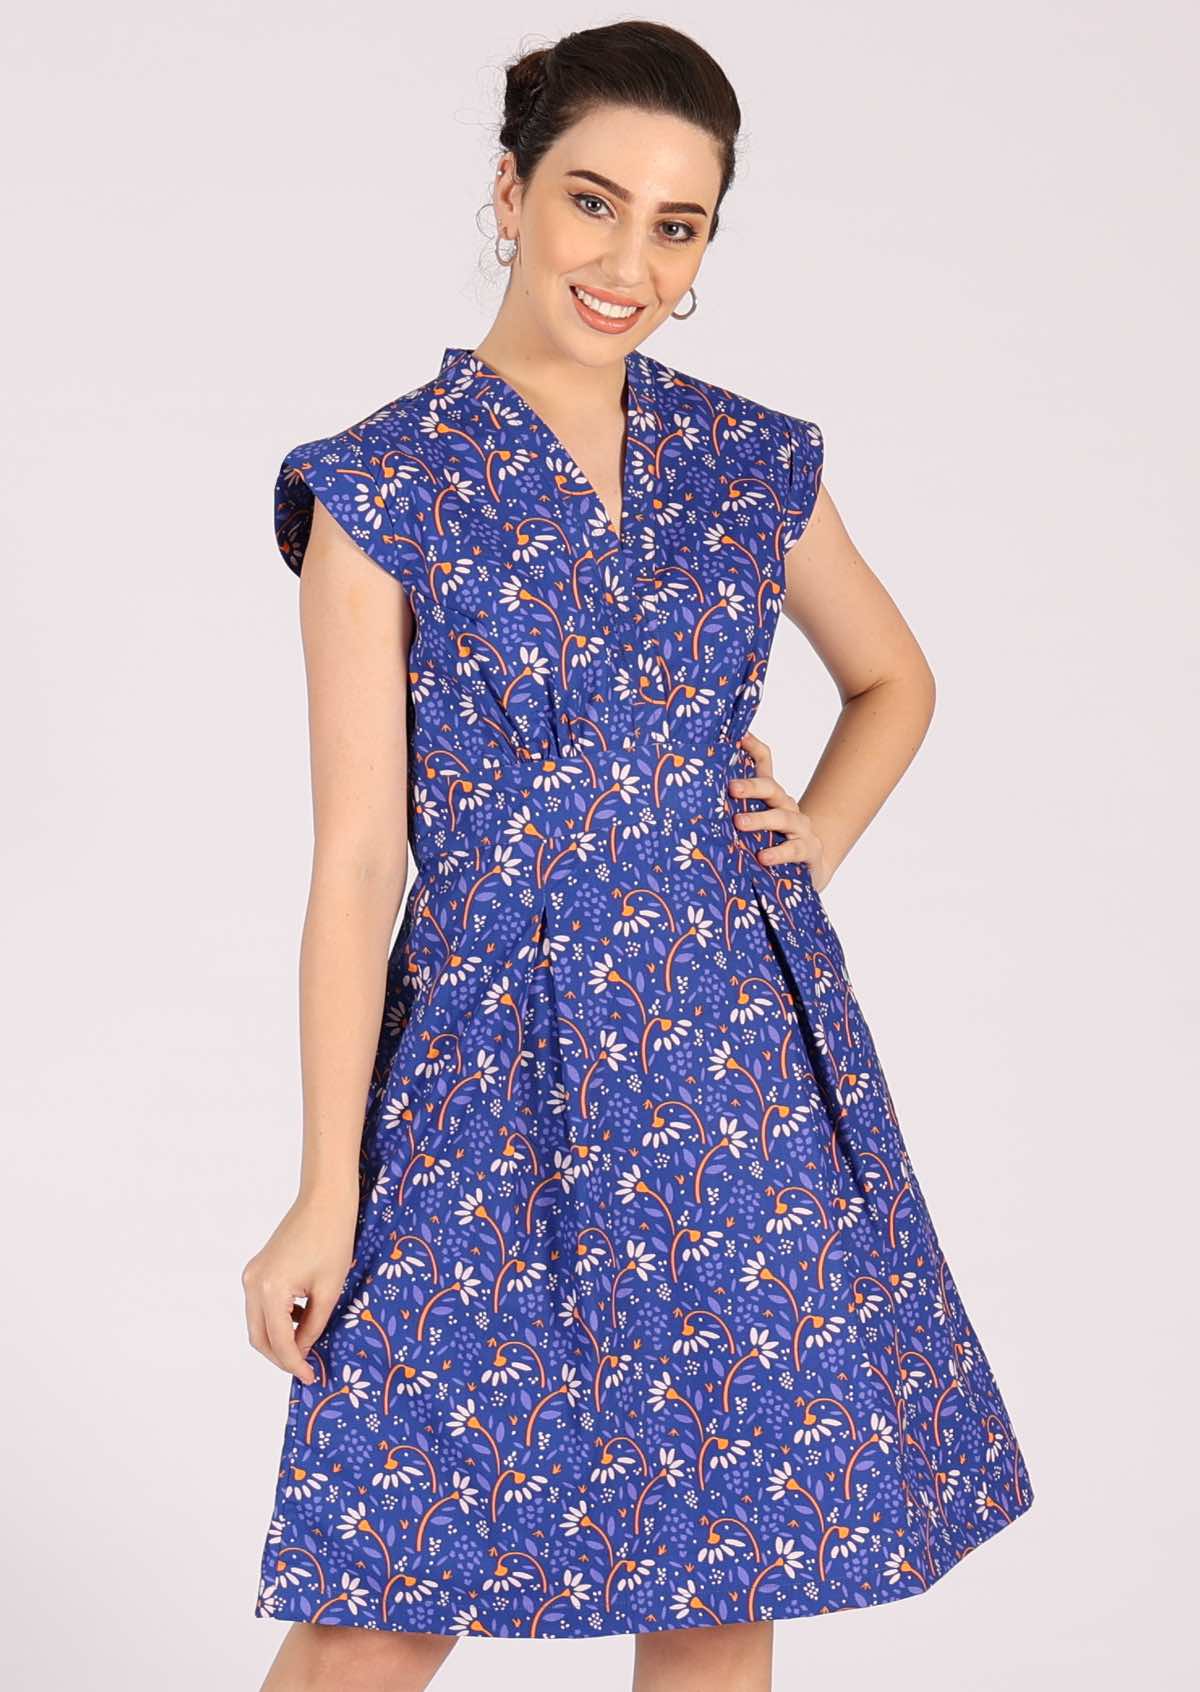 Retro cotton dress with cap sleeves and box pleats